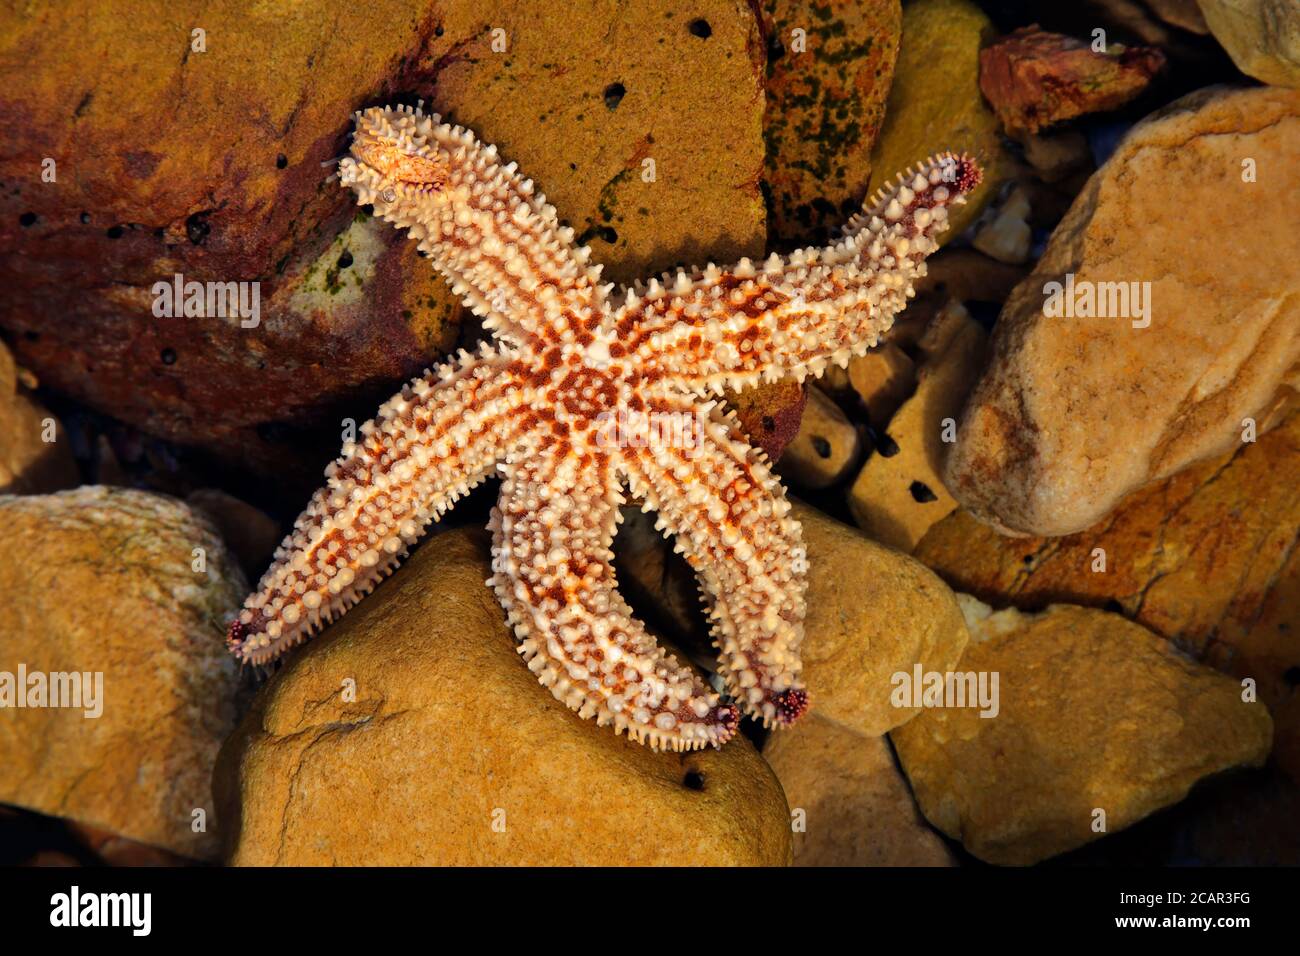 Colorful yellow and orange starfish in a coastal rock pool, South Africa Stock Photo